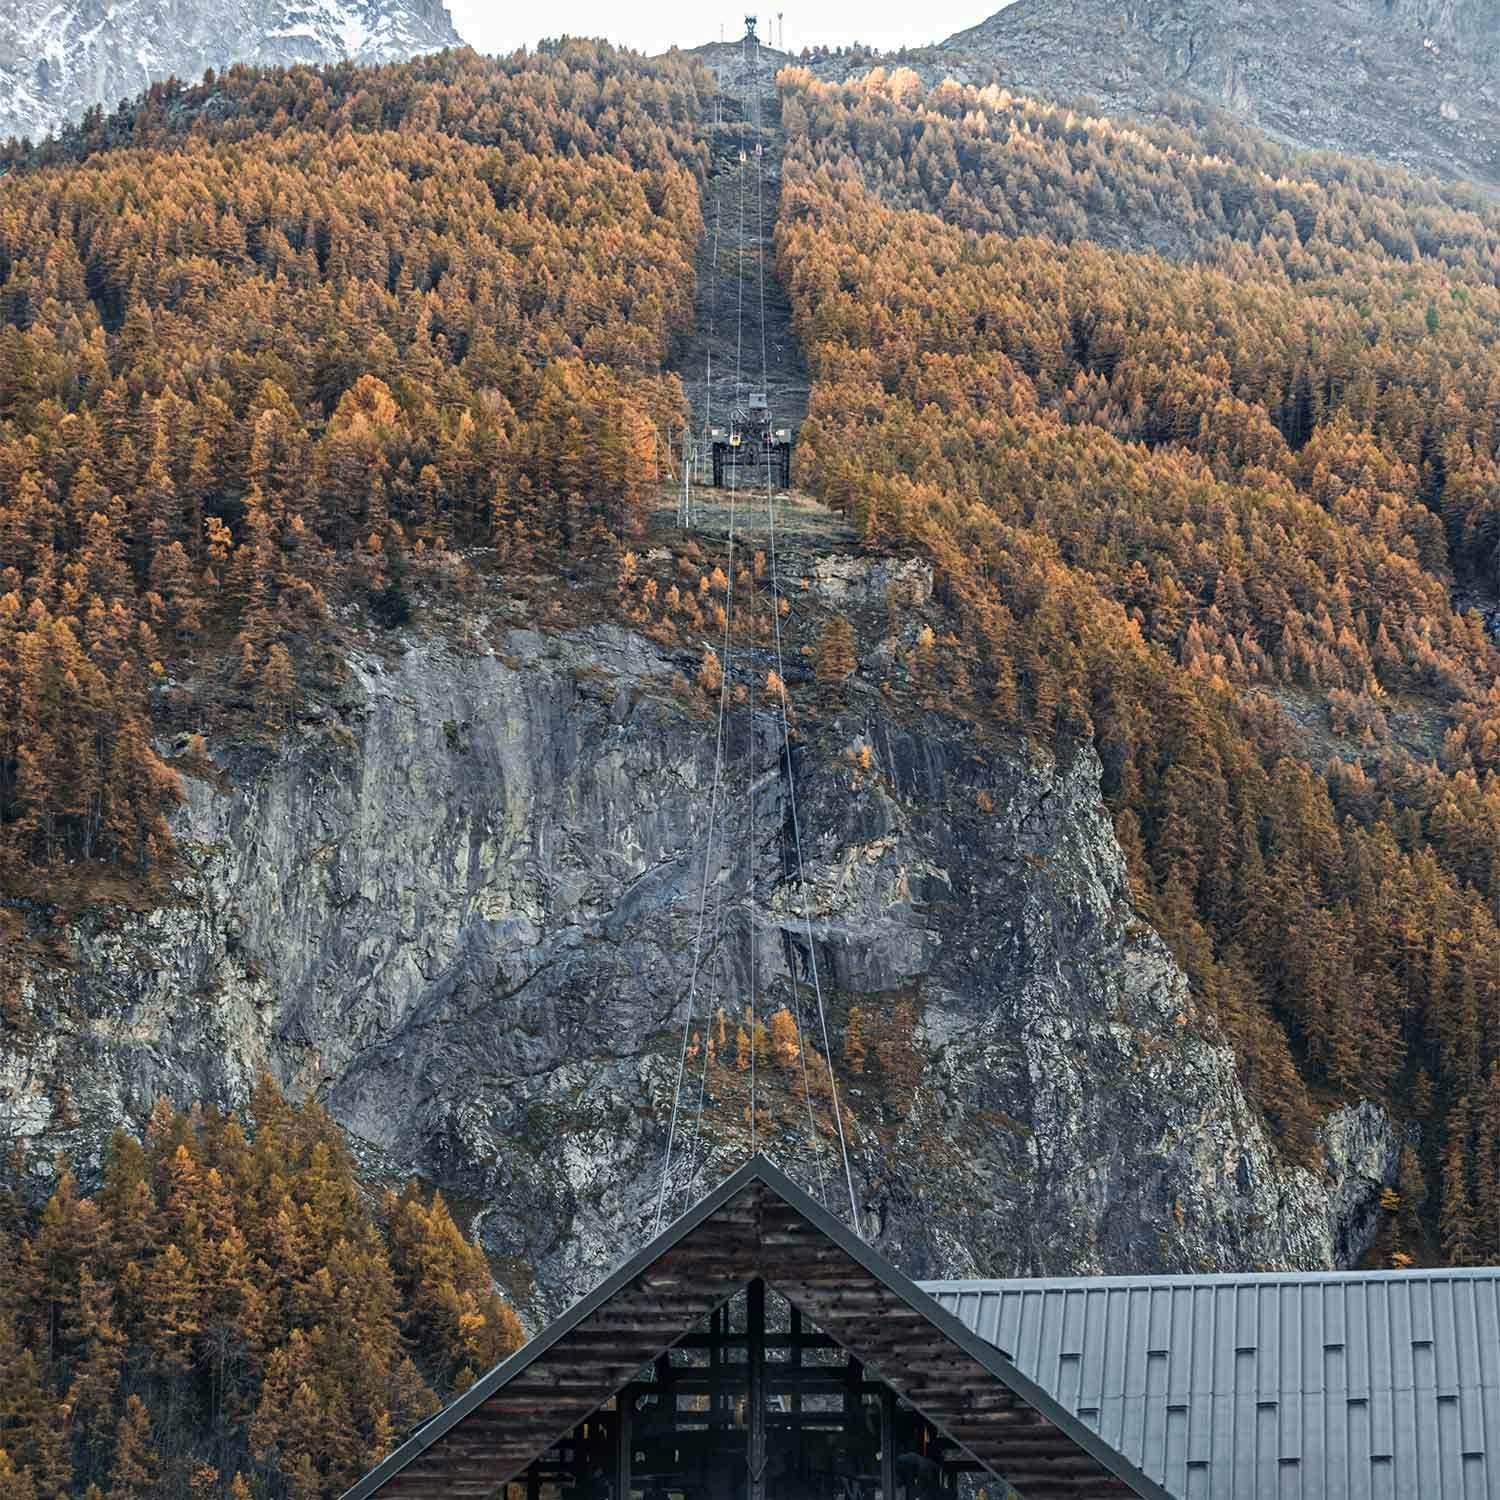 The cables and 3 gondola stations surrounded by a hillside of trees in La Grave